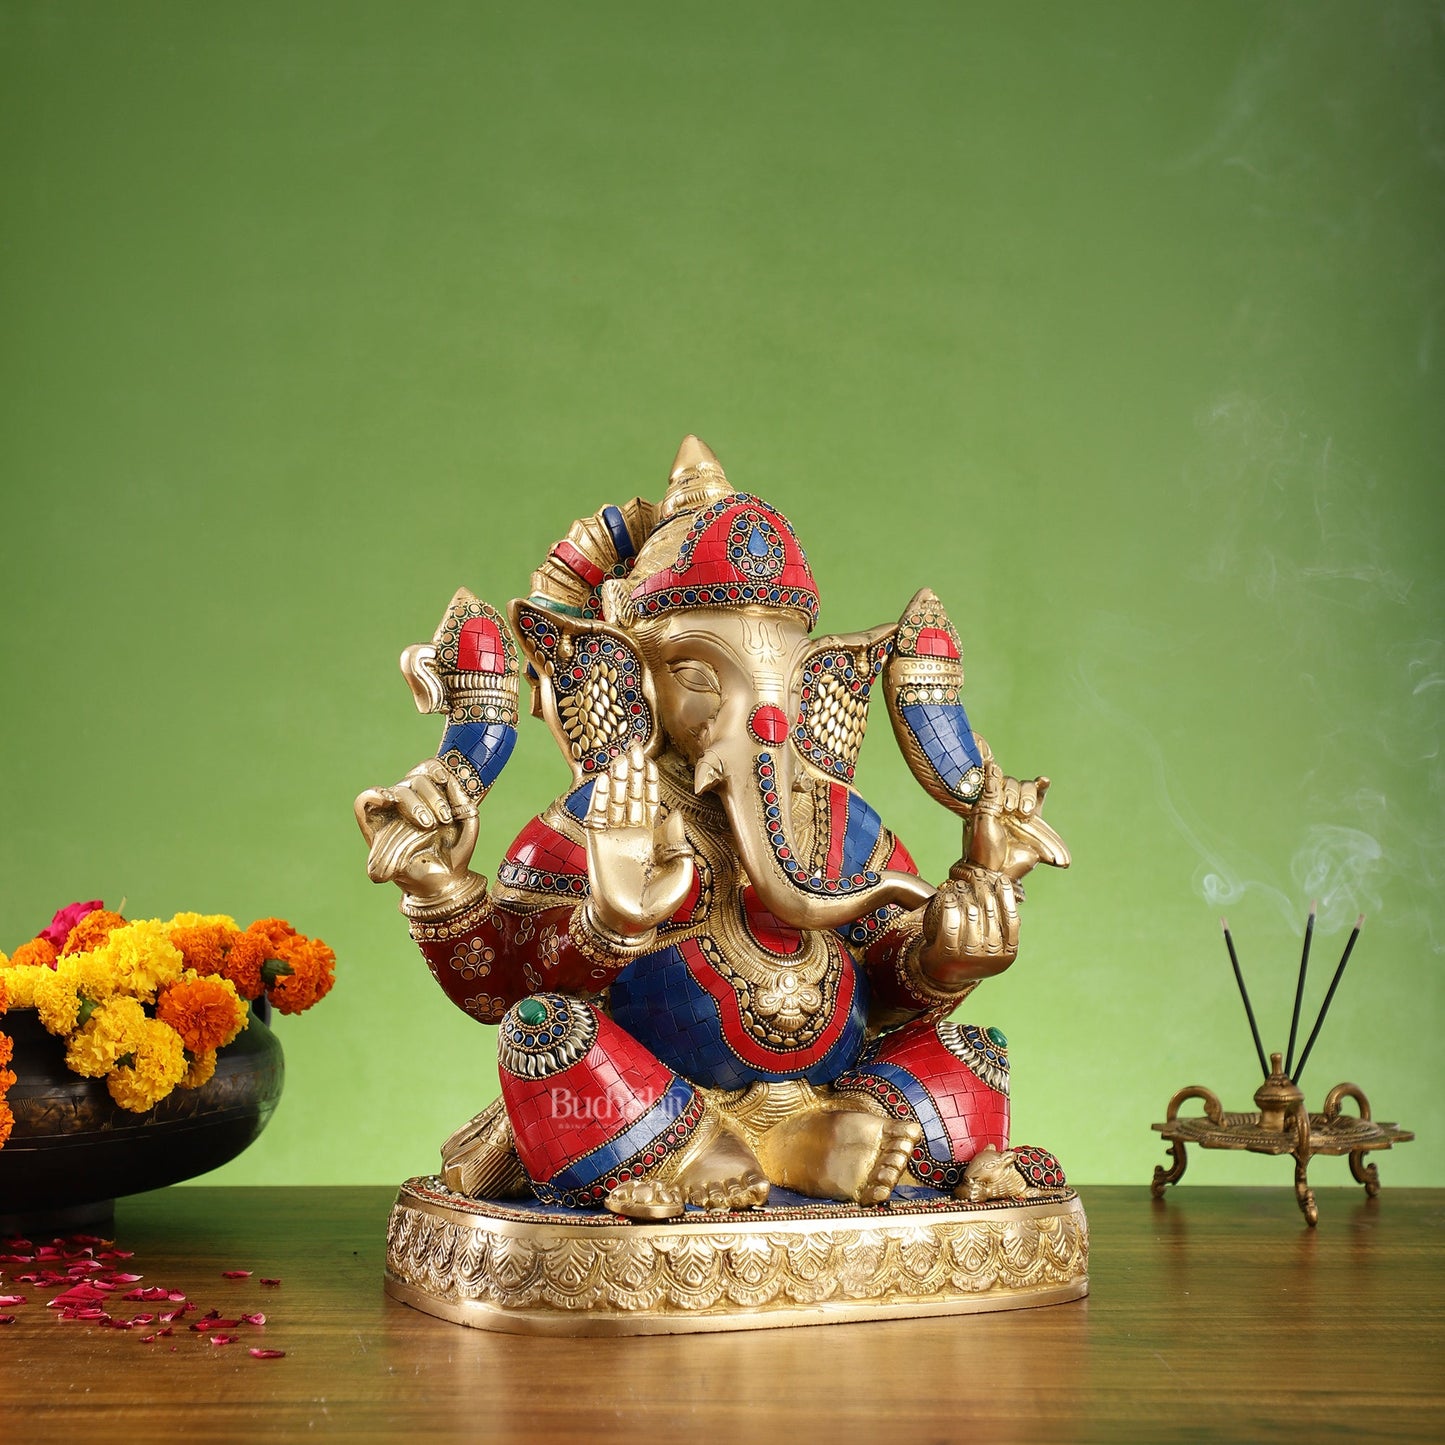 Brass Superfine Lord Ganesha Statue with Attached Pedestal - 15 inch with stonework - Budhshiv.com